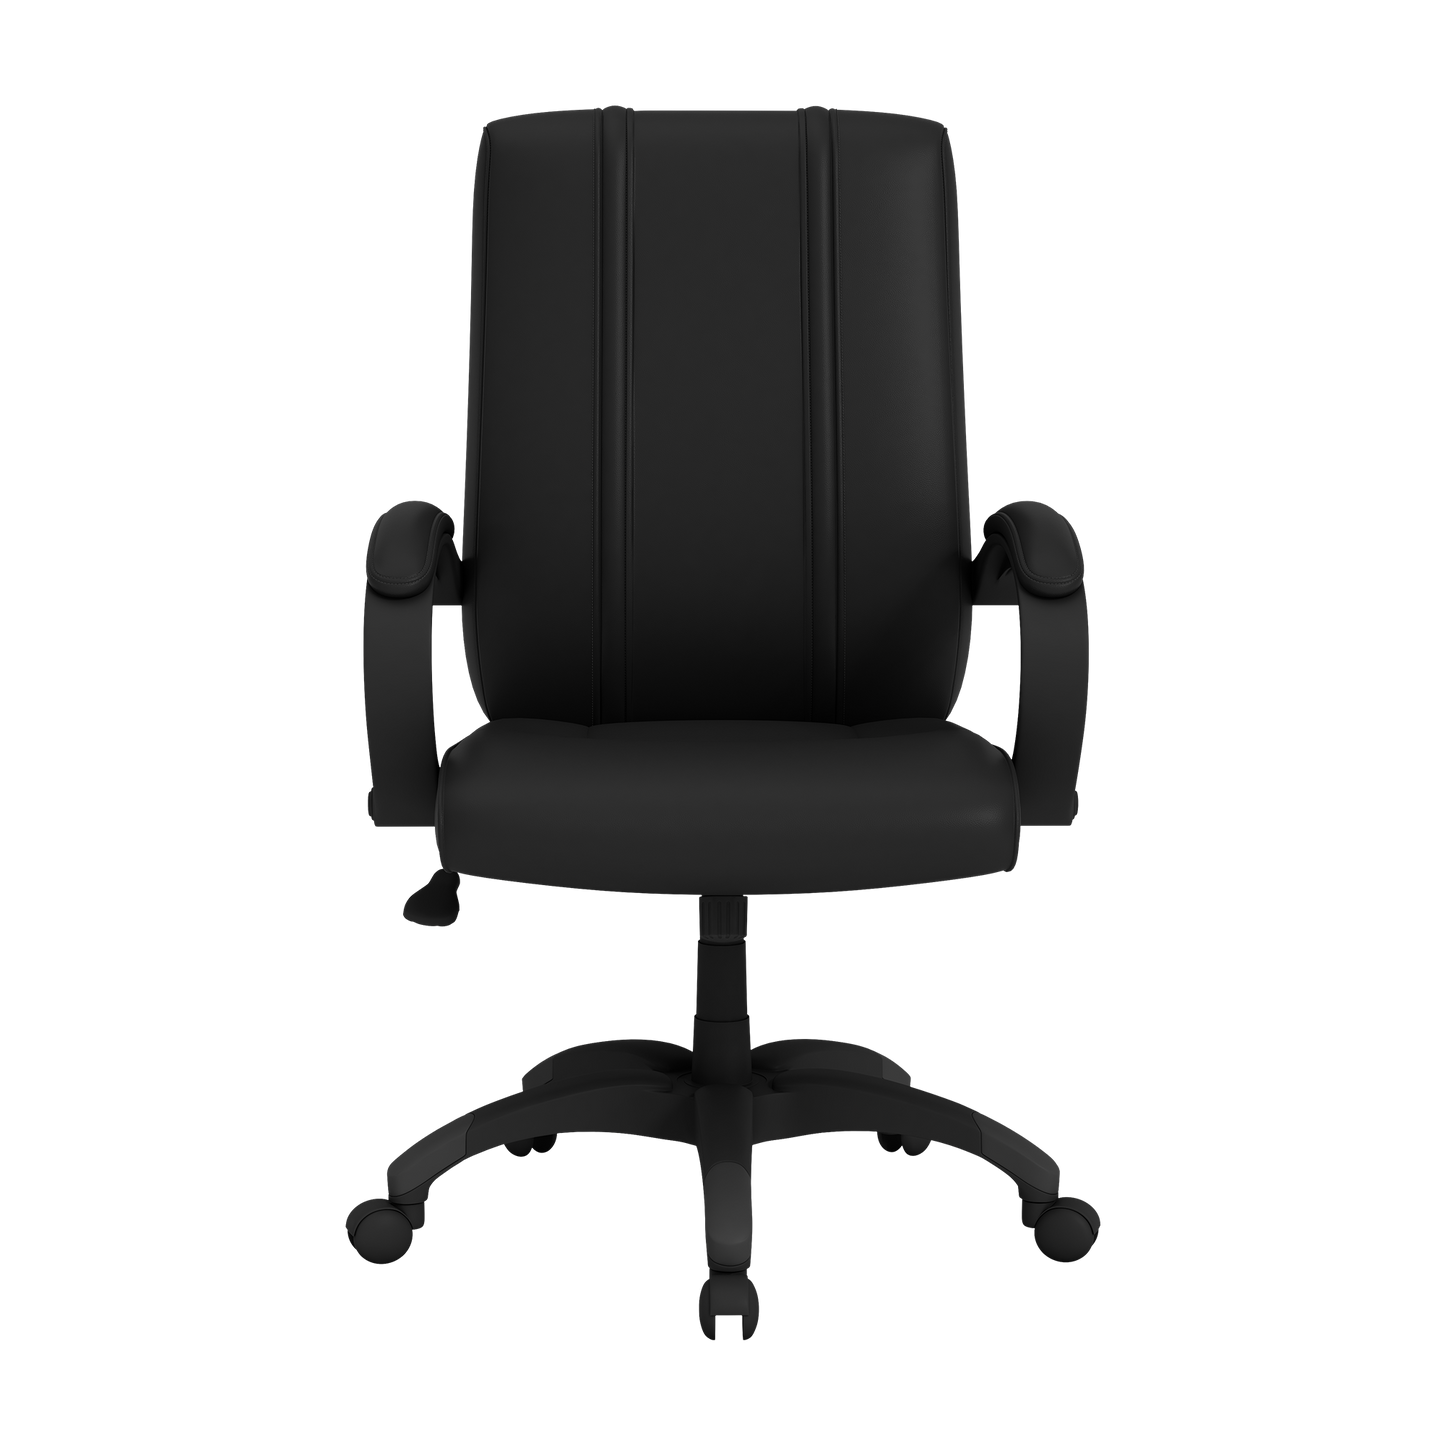 Office Chair 1000 with Buffalo Sabres Logo